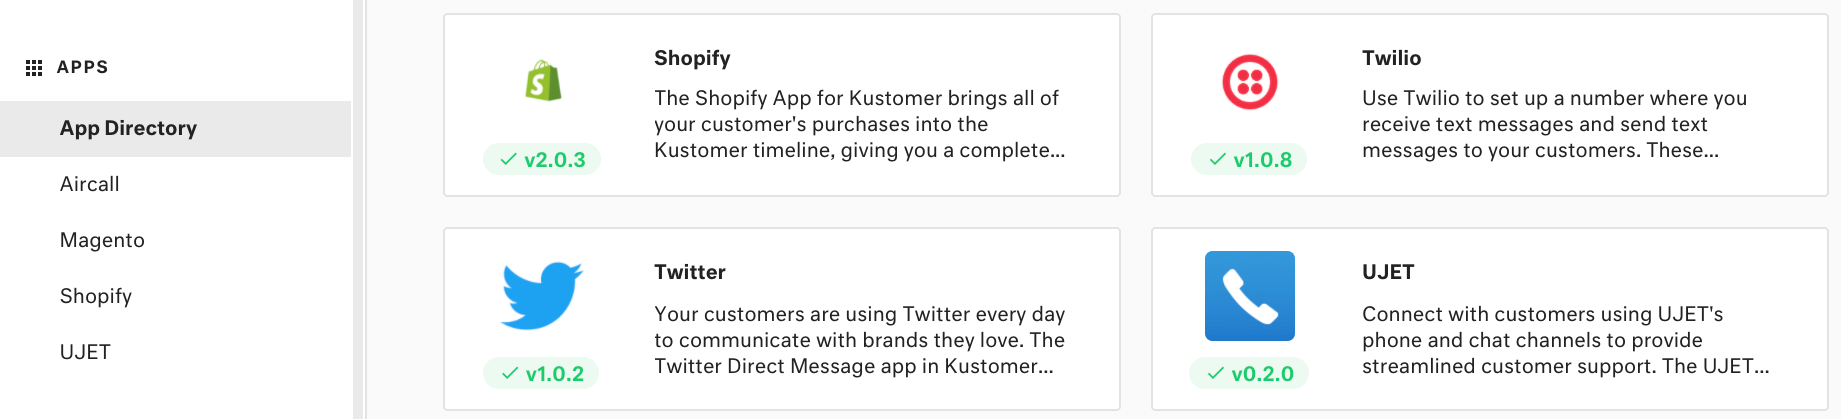 The Kustomer App Directory featuring four apps: Shopify, Twilio, Twitter, and UJET.